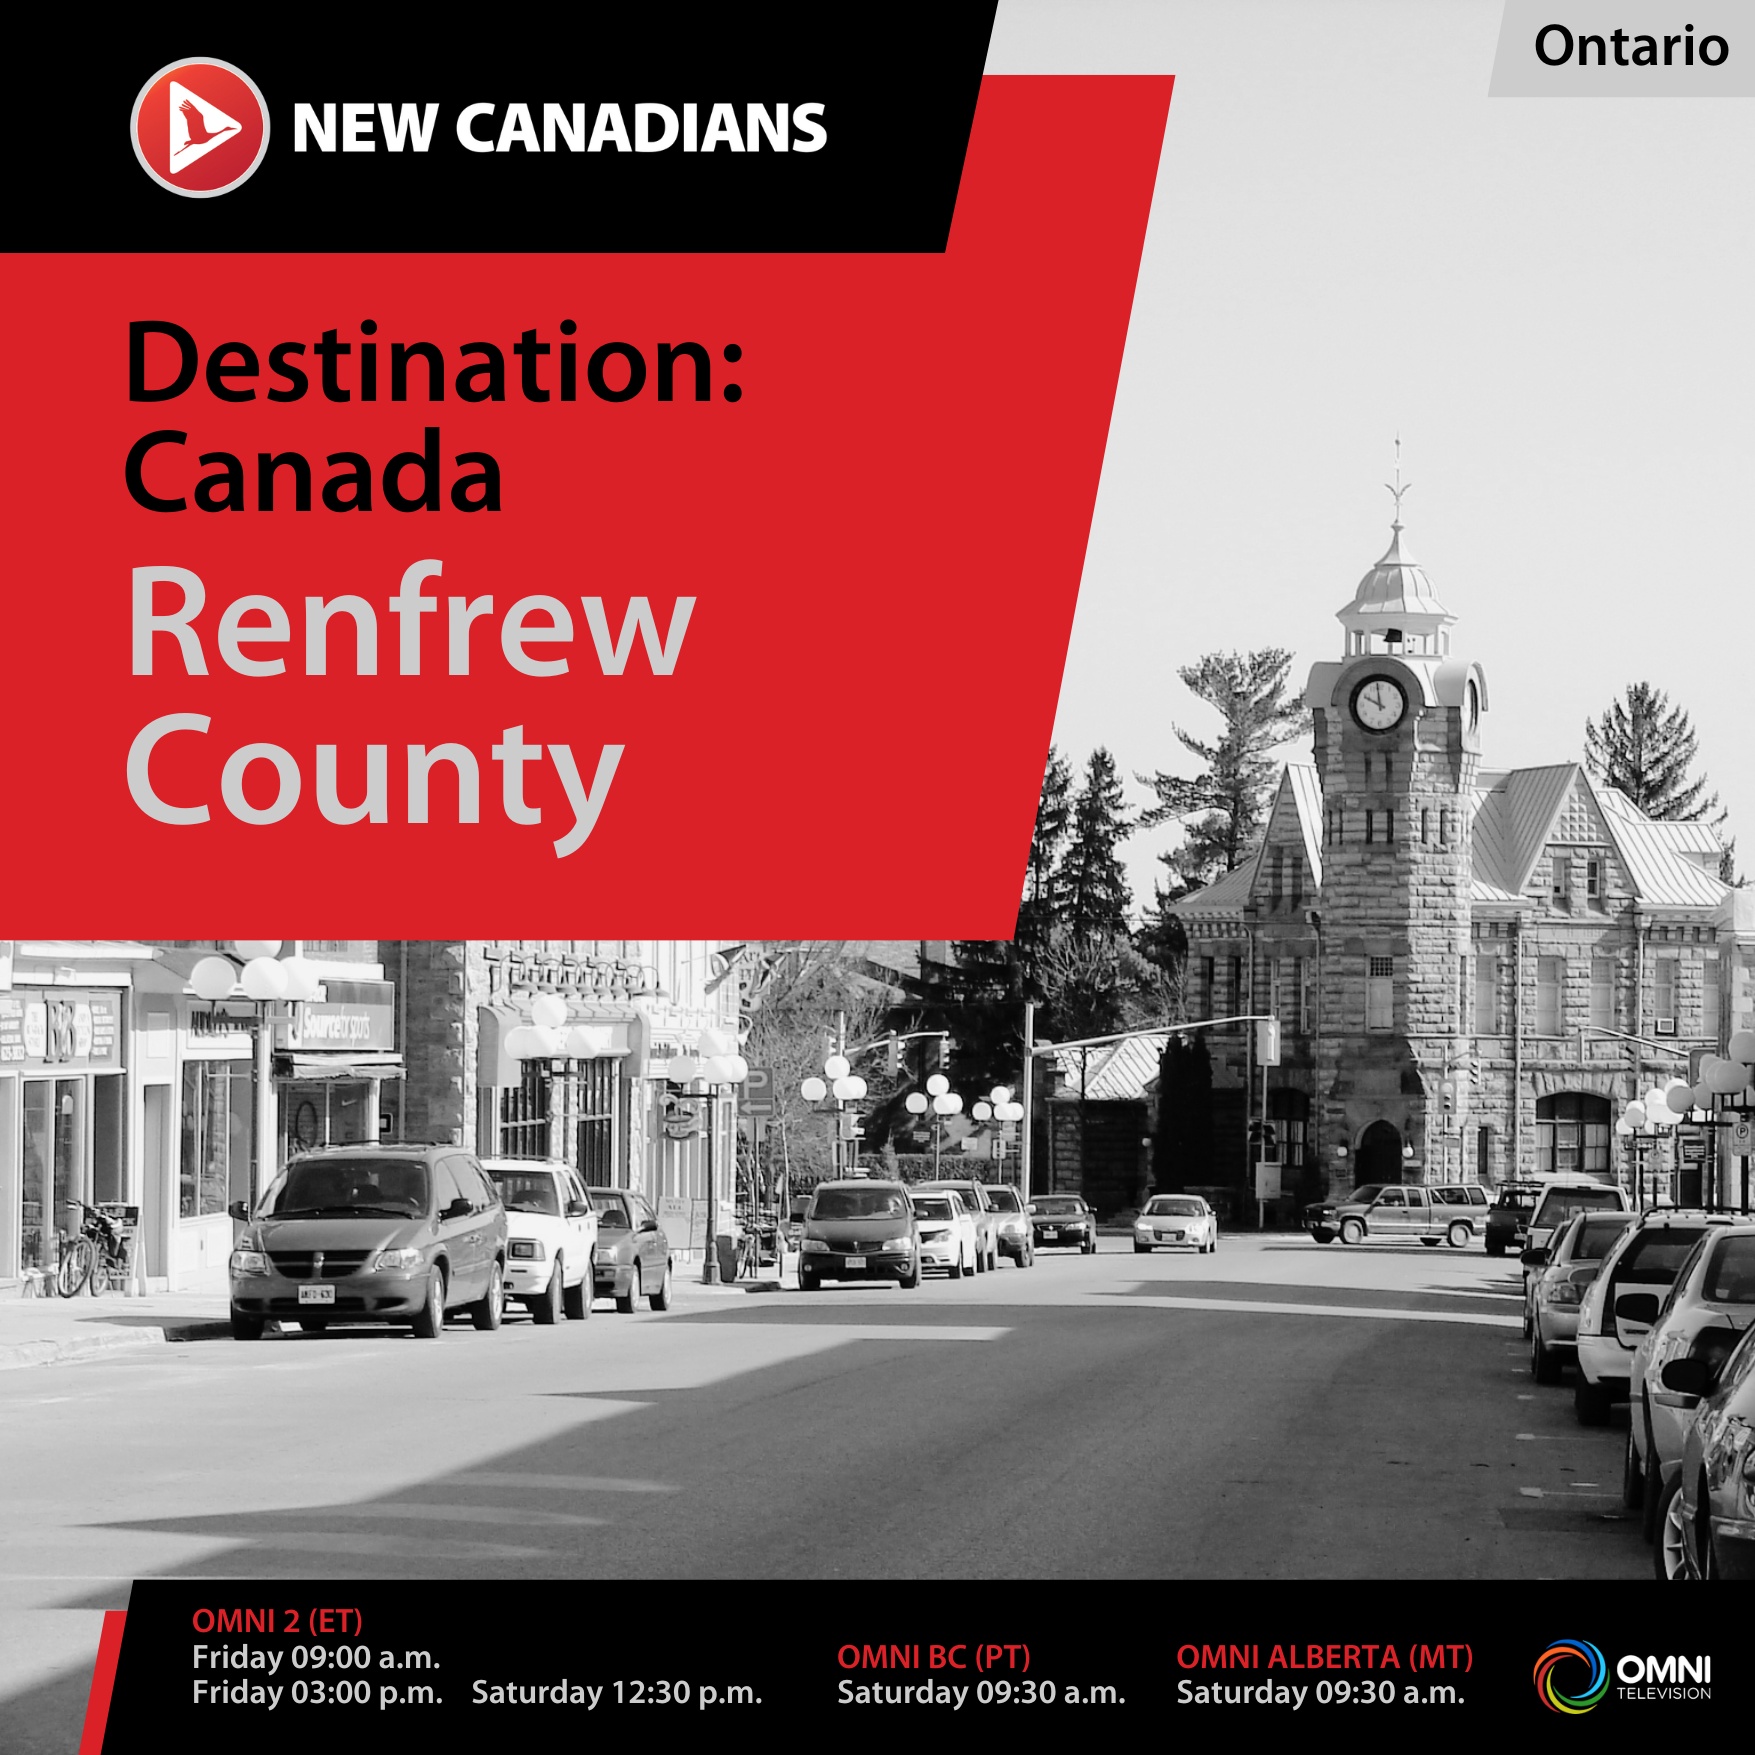 Graphic announcing the Omni feature of Renfrew County on newcomers.